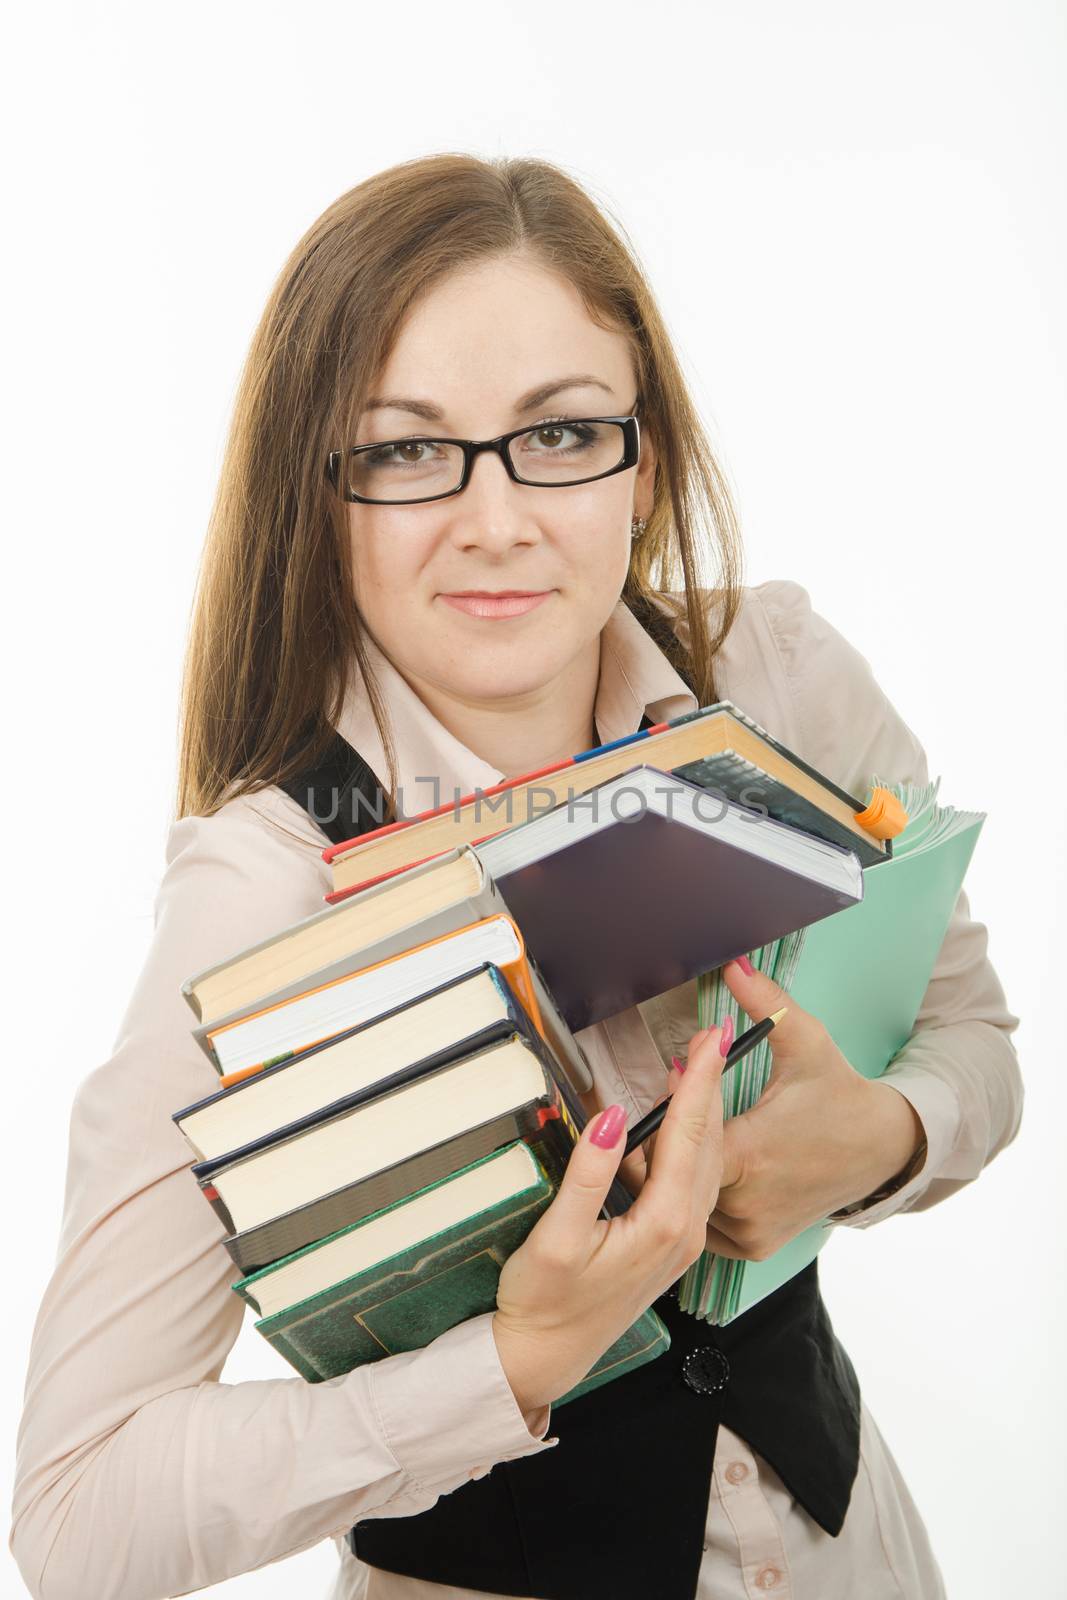 Europeans Portrait of a teacher with a bunch of textbooks and exercise books in the hands of